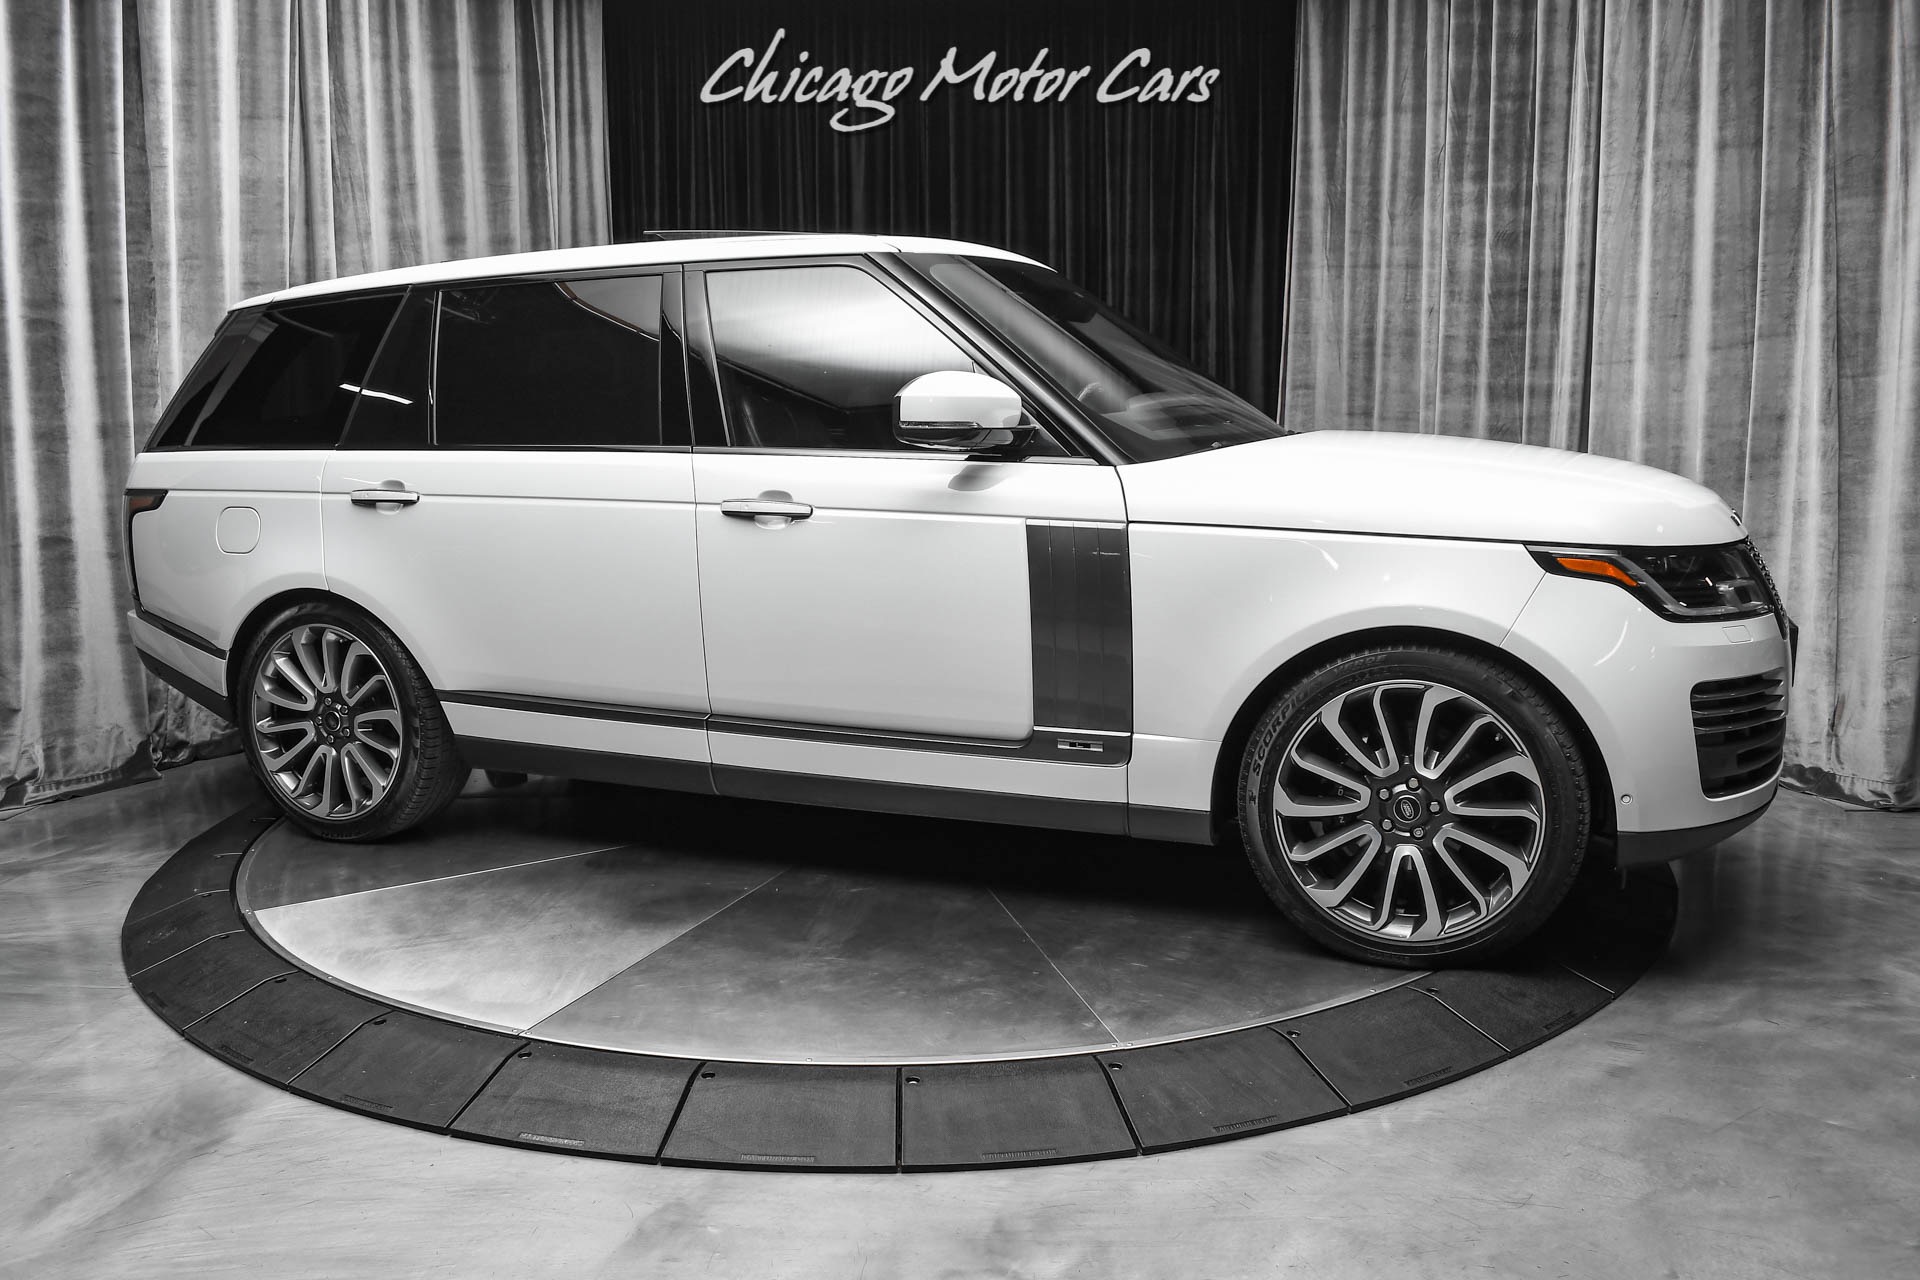 Used-2020-Land-Rover-Range-Rover-Autobiography-LWB-Rear-Entertainment-Diamond-Turned-Wheels-Loaded